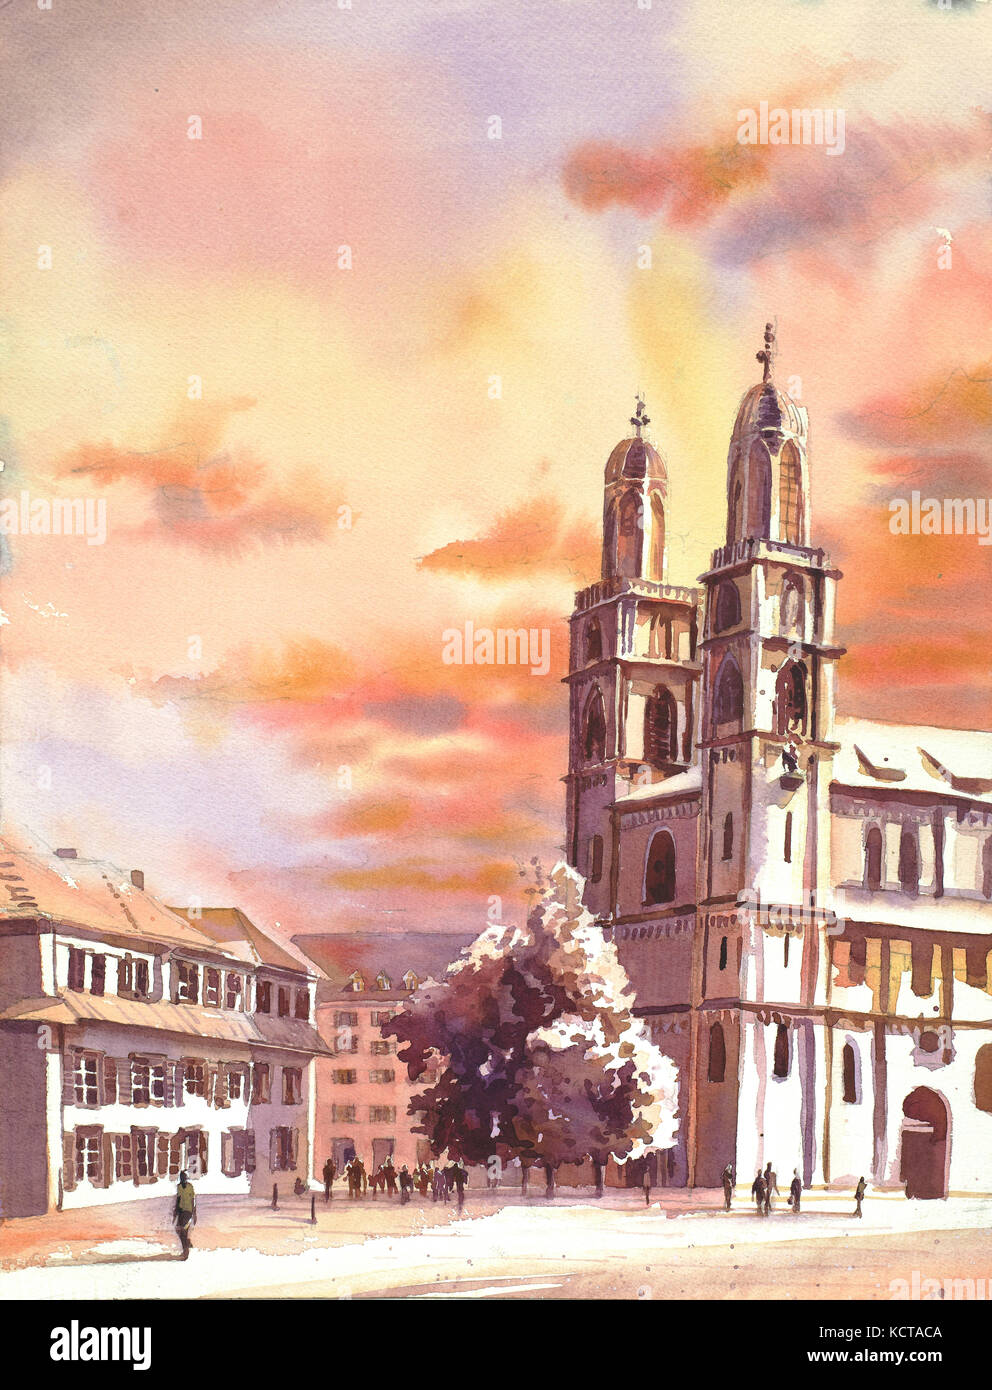 Fine art watercolor painting of the 12th century Grossmunster church in medieval Zurich, Switzerland.  Painting of church in Switzerland. Stock Photo